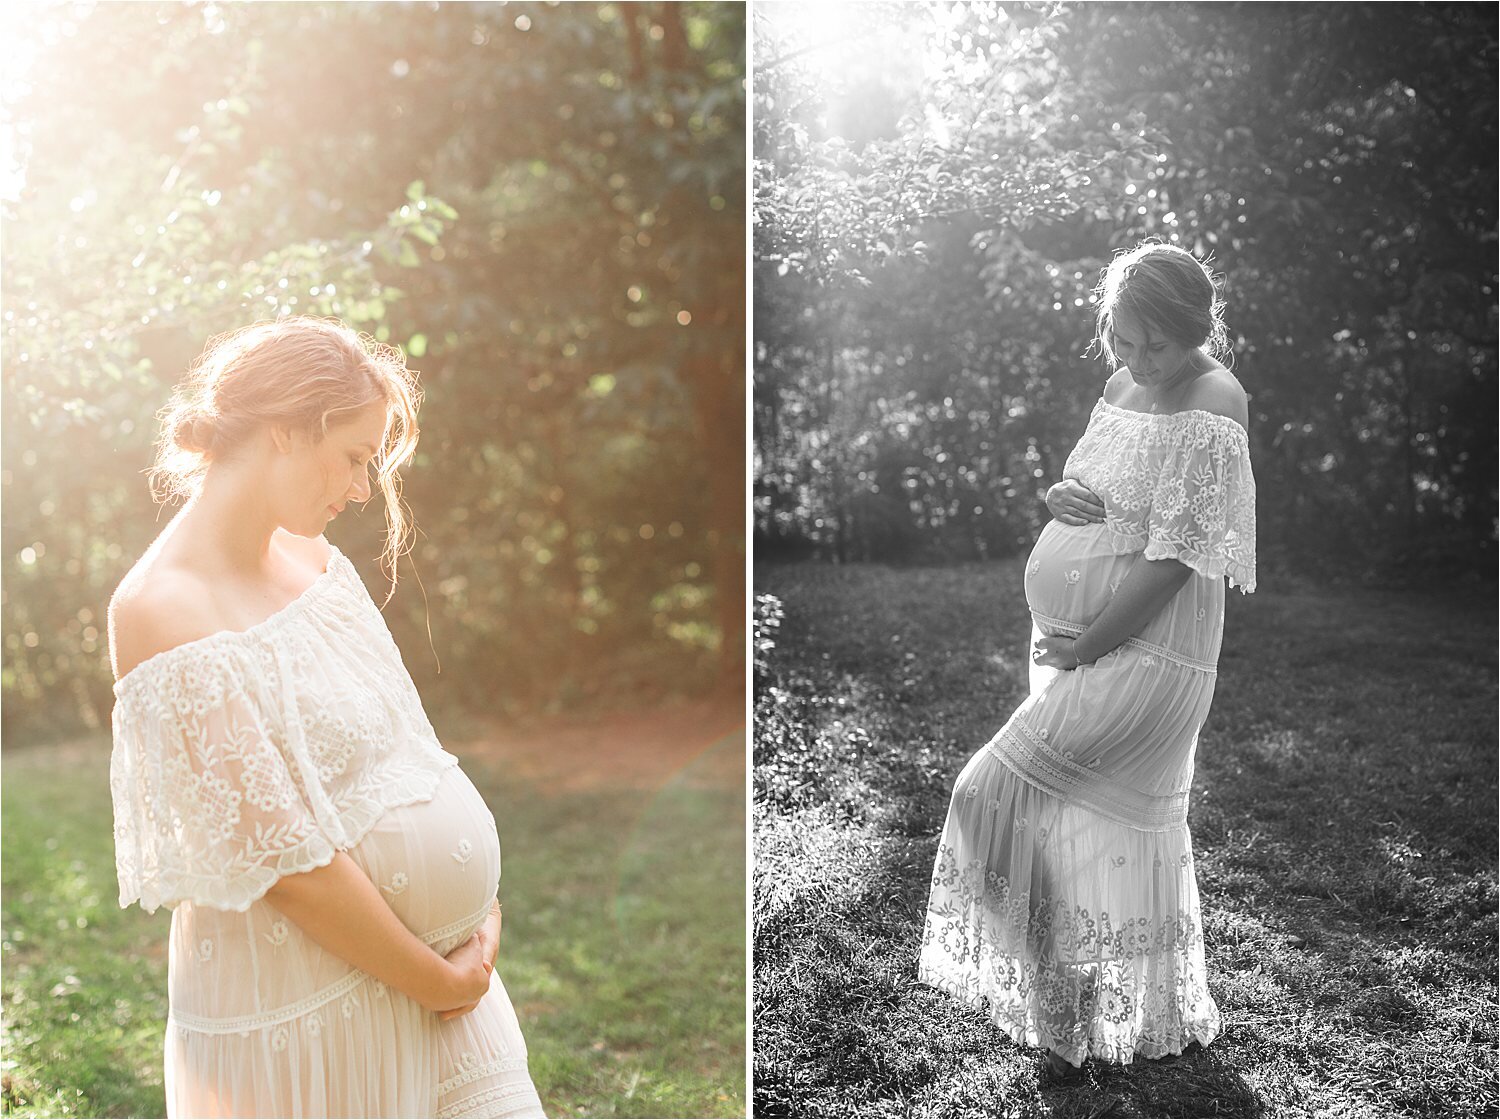 Central_Park_Maternity_Session_with_NYC_Baby_Photographer_Nicole_Hawkins_Photography_September_2019-7_Web.jpg